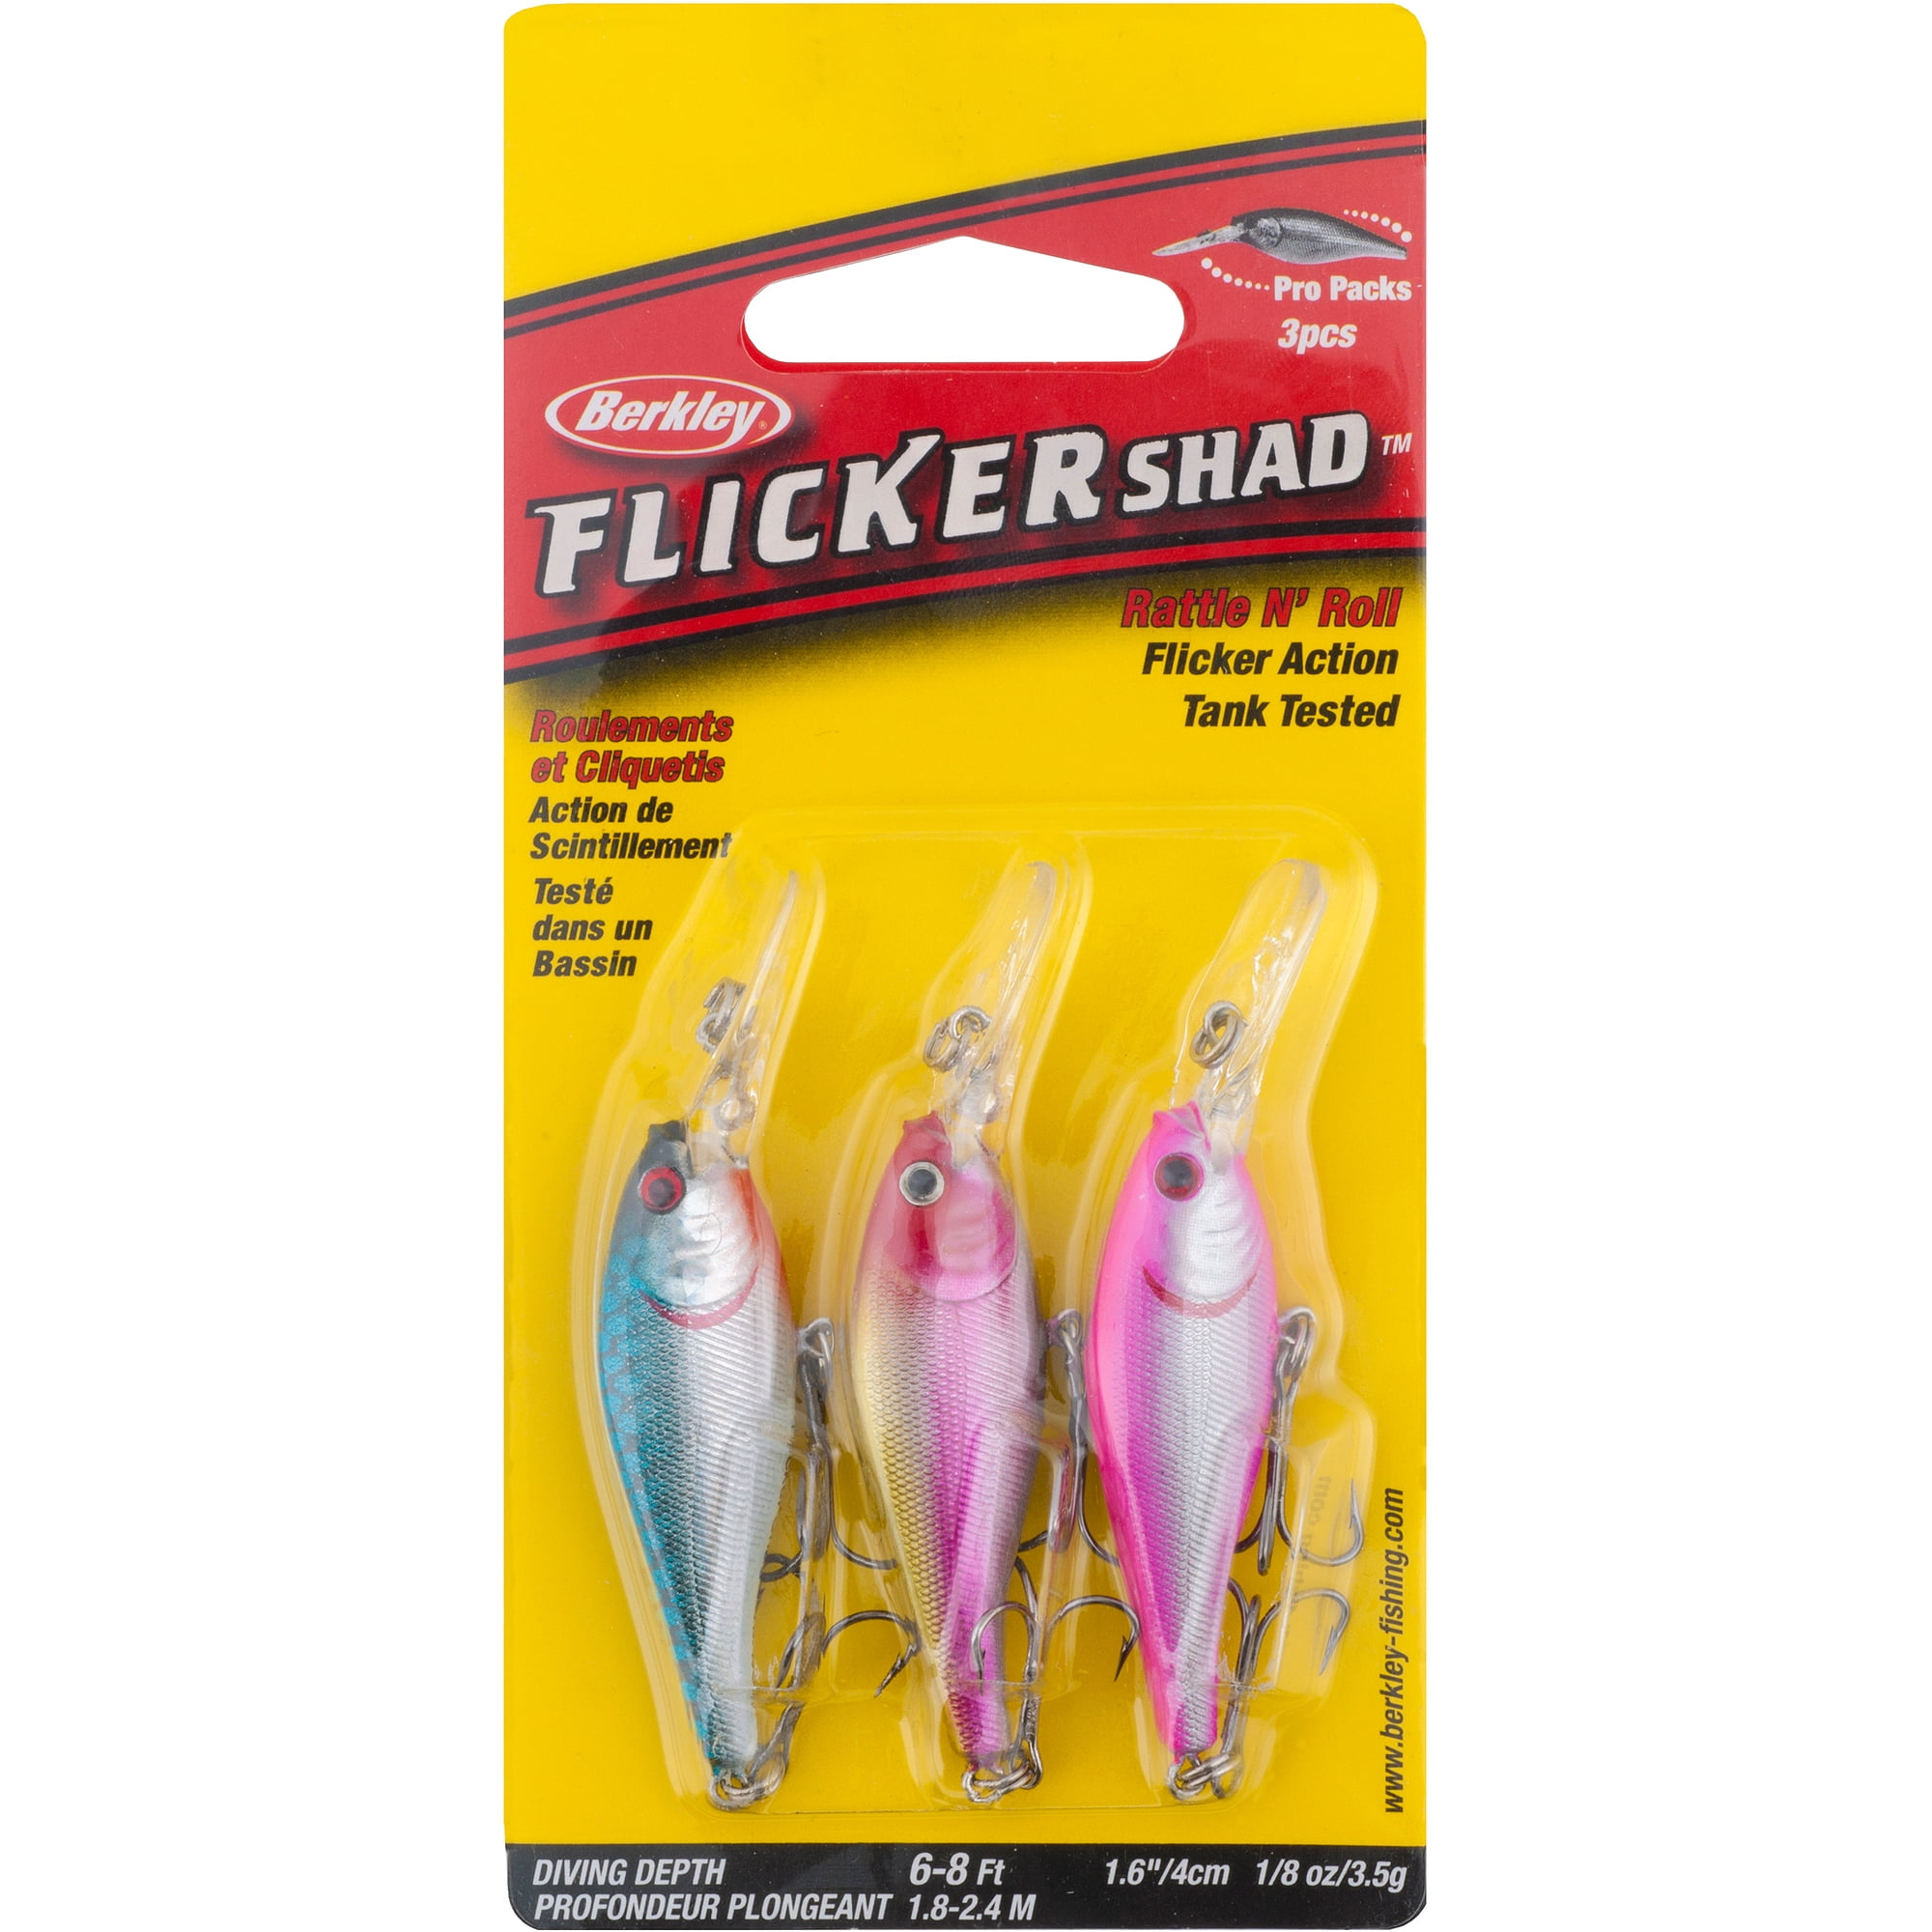 Berkley Flicker Shad Fishing Lure Trout 3-Pack, 1 1/2in